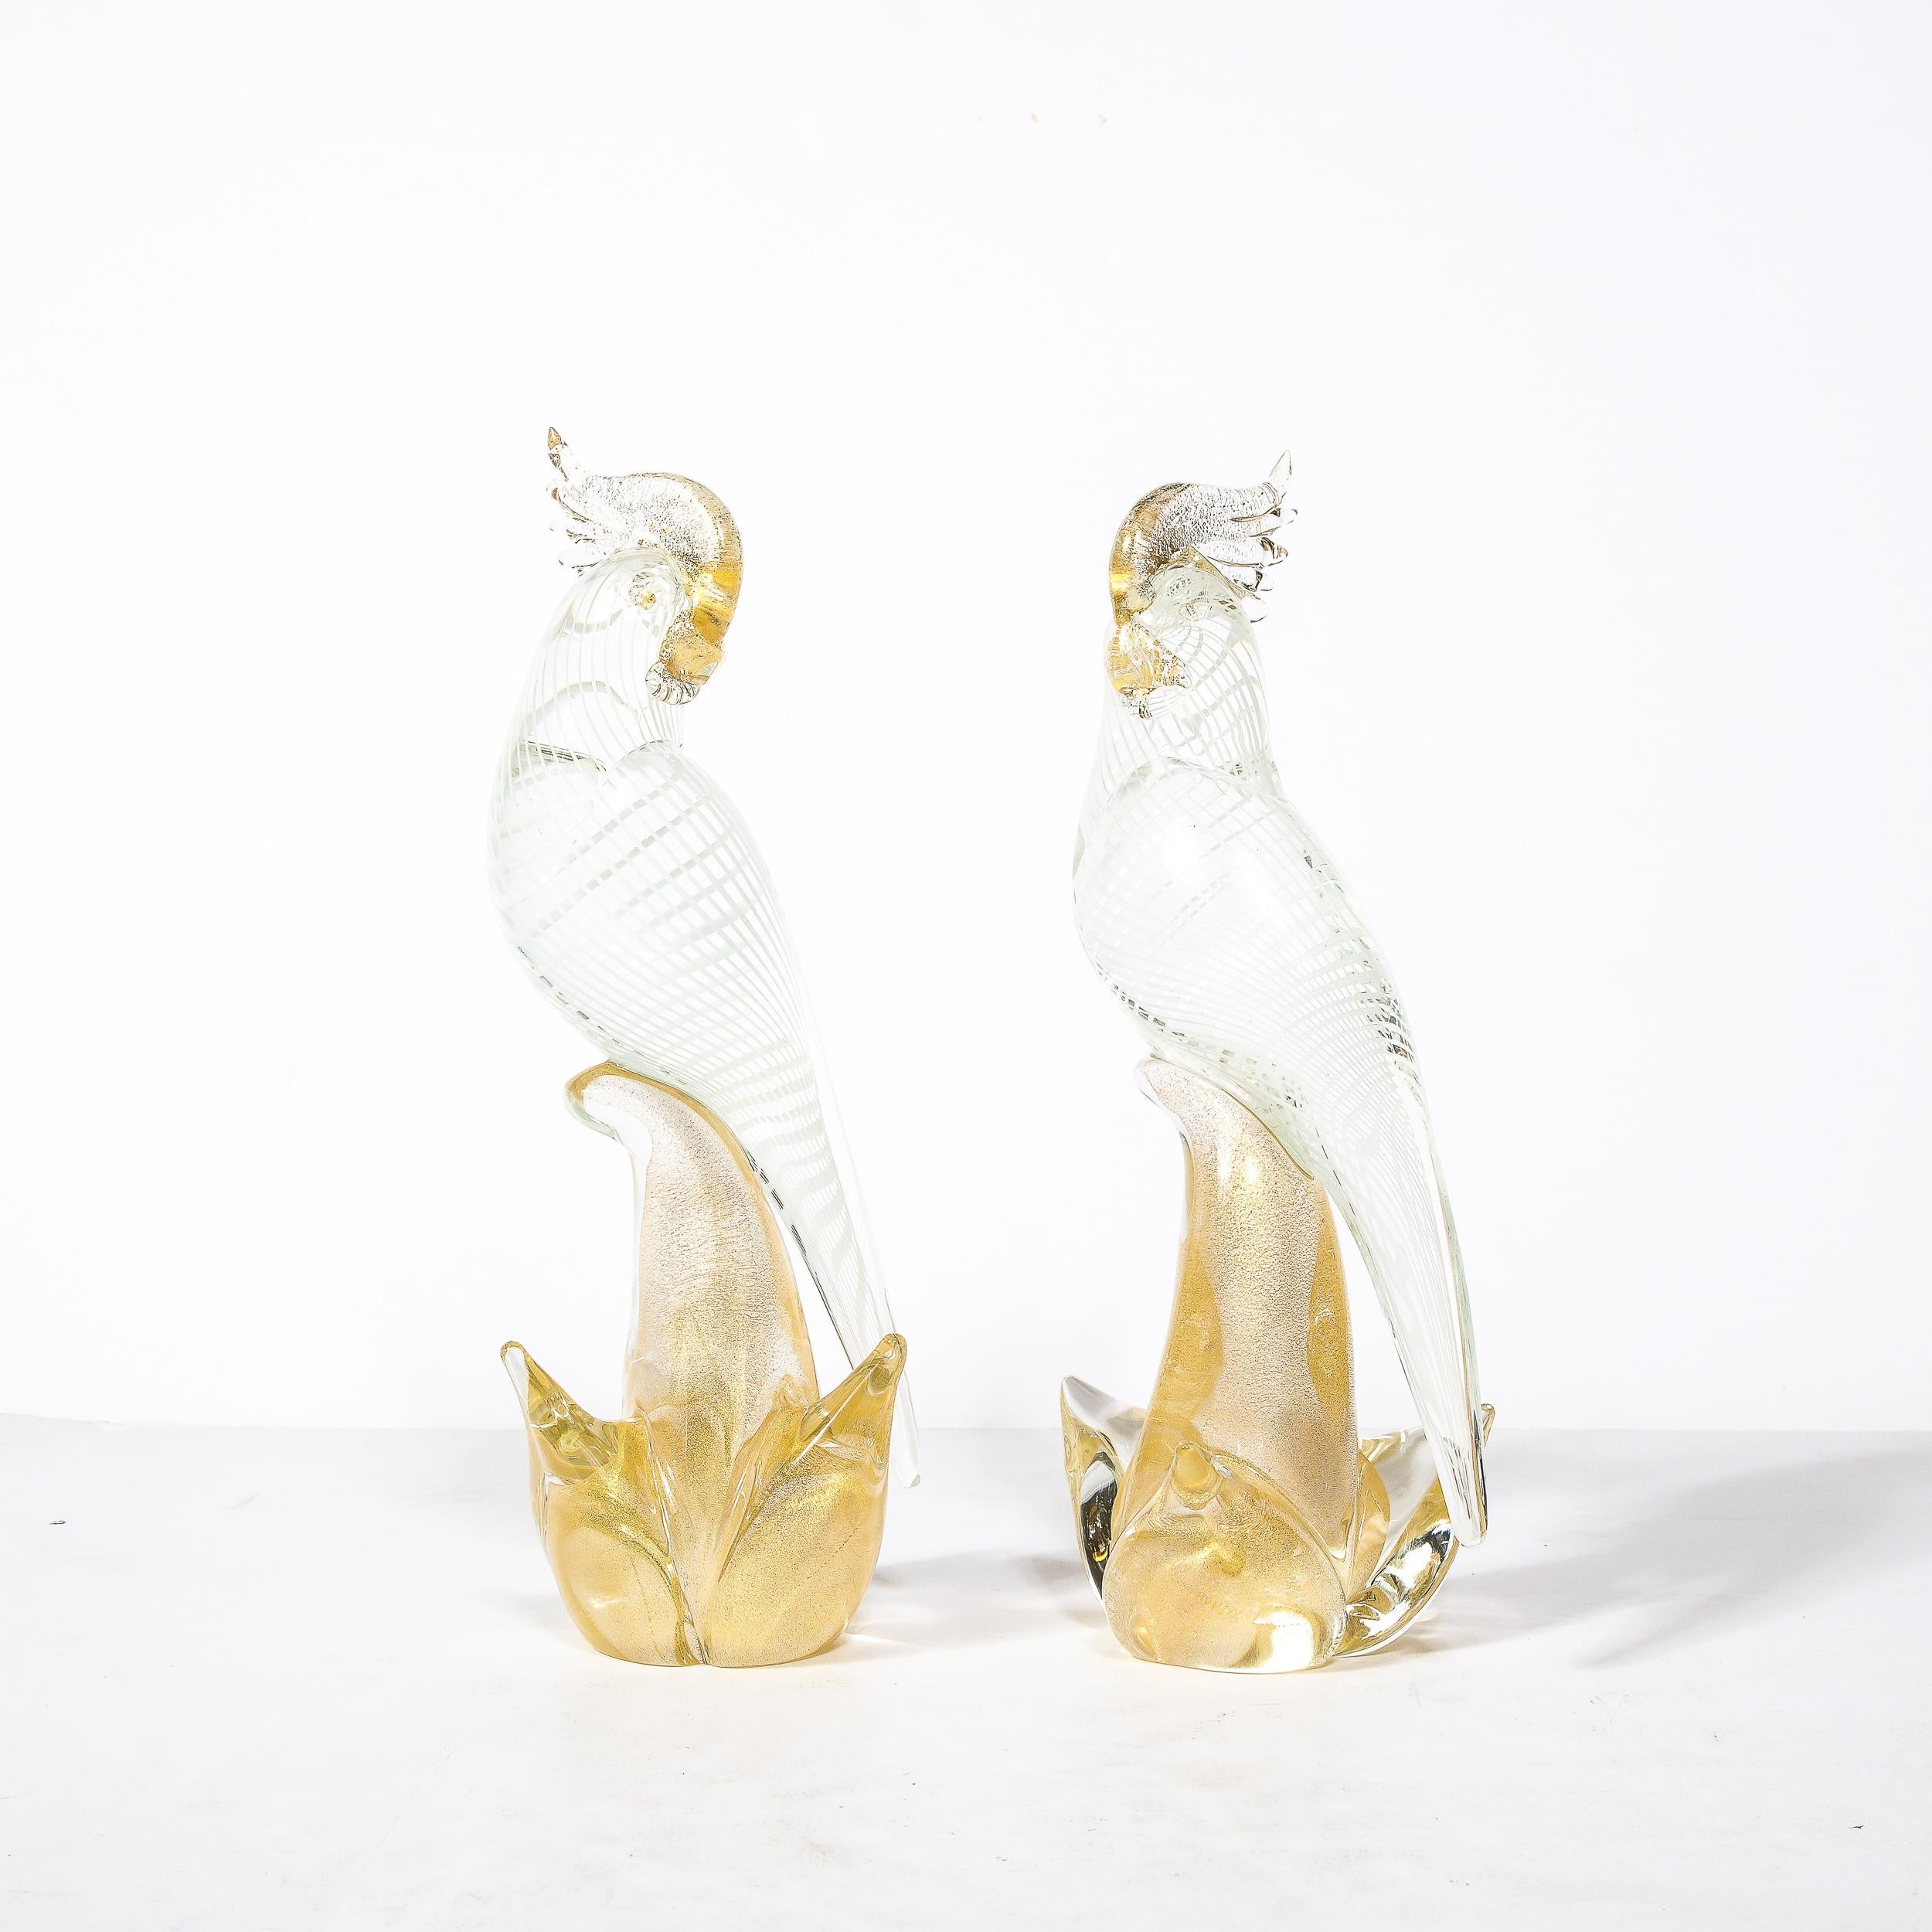 This pair of Hand Blown Murano Glass Sculptures Originates from Italy, Circa 1950. Hand-Blown in Translucent Murano Glass with White Filigree Detailing and 24 Karat Gold Flecks, the pair are sculptures of Cockatiels Perched in a relaxed pose with